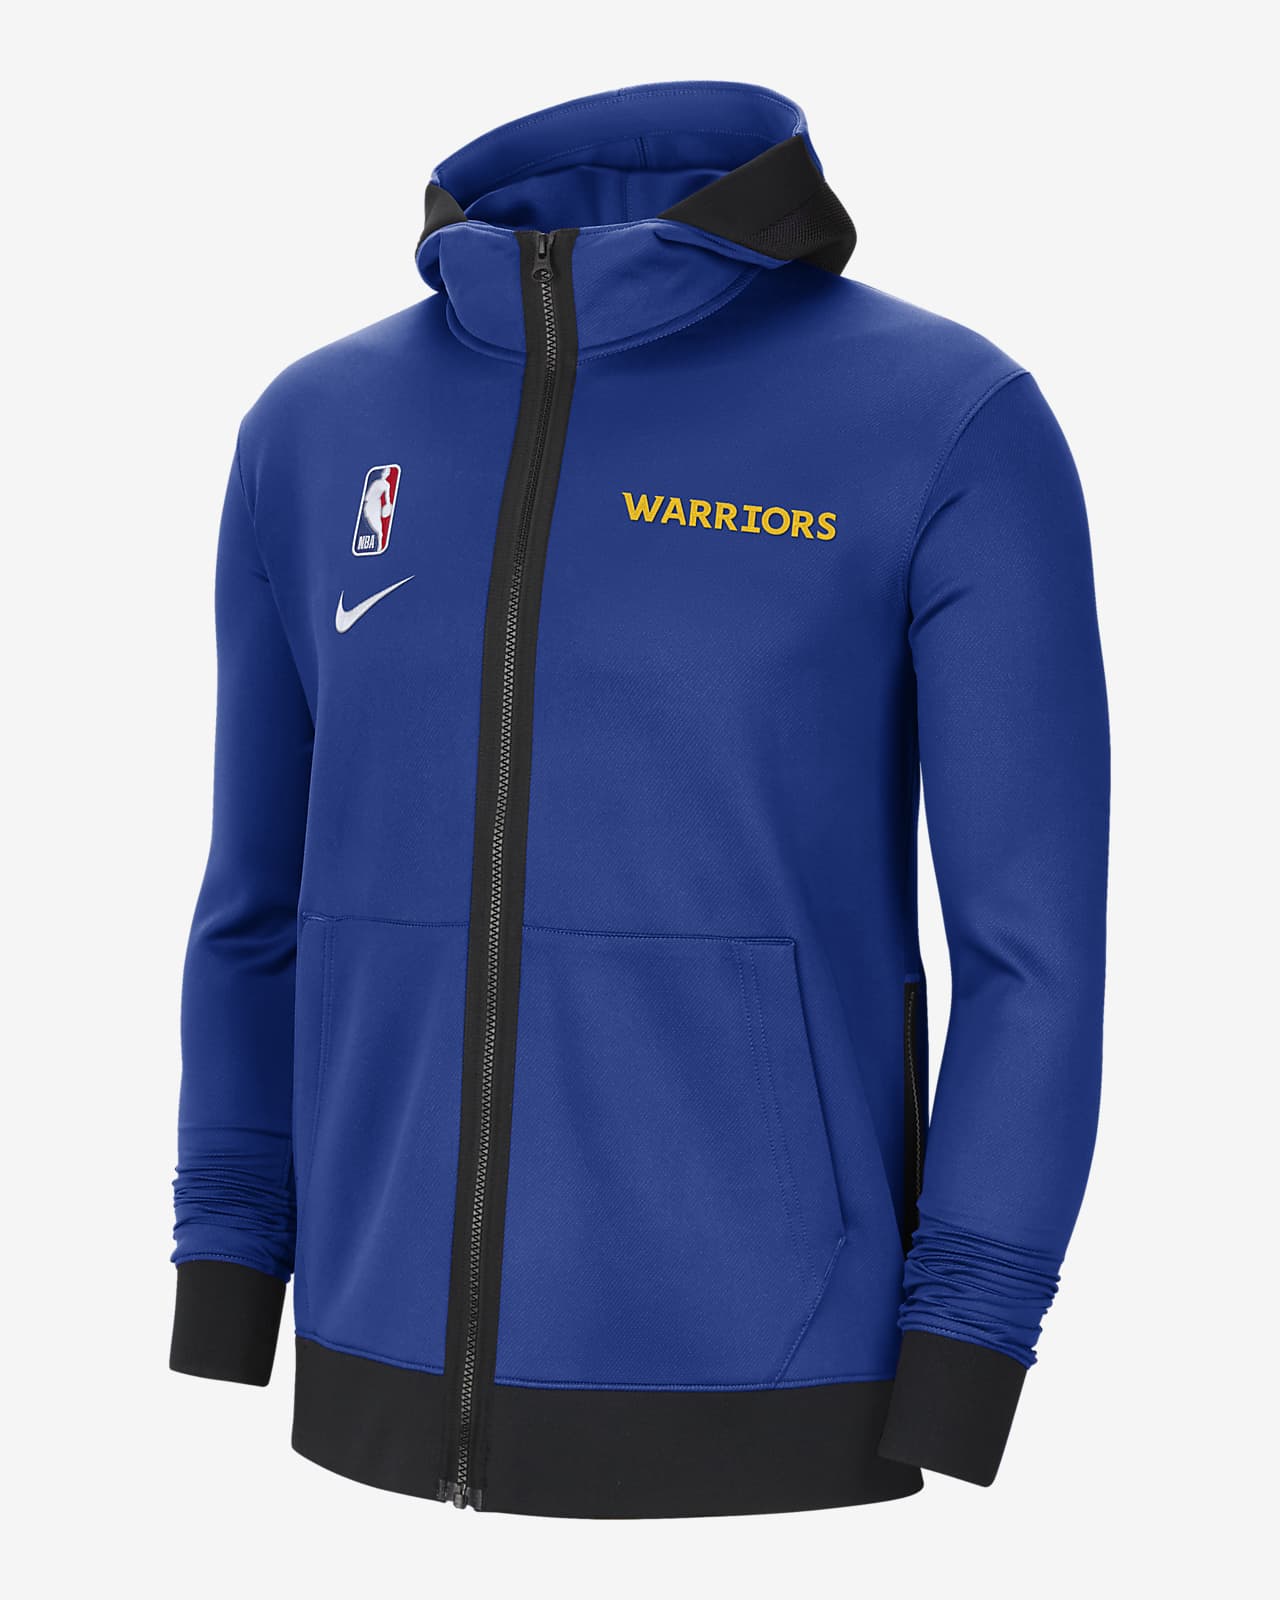 golden state warriors therma hoodie